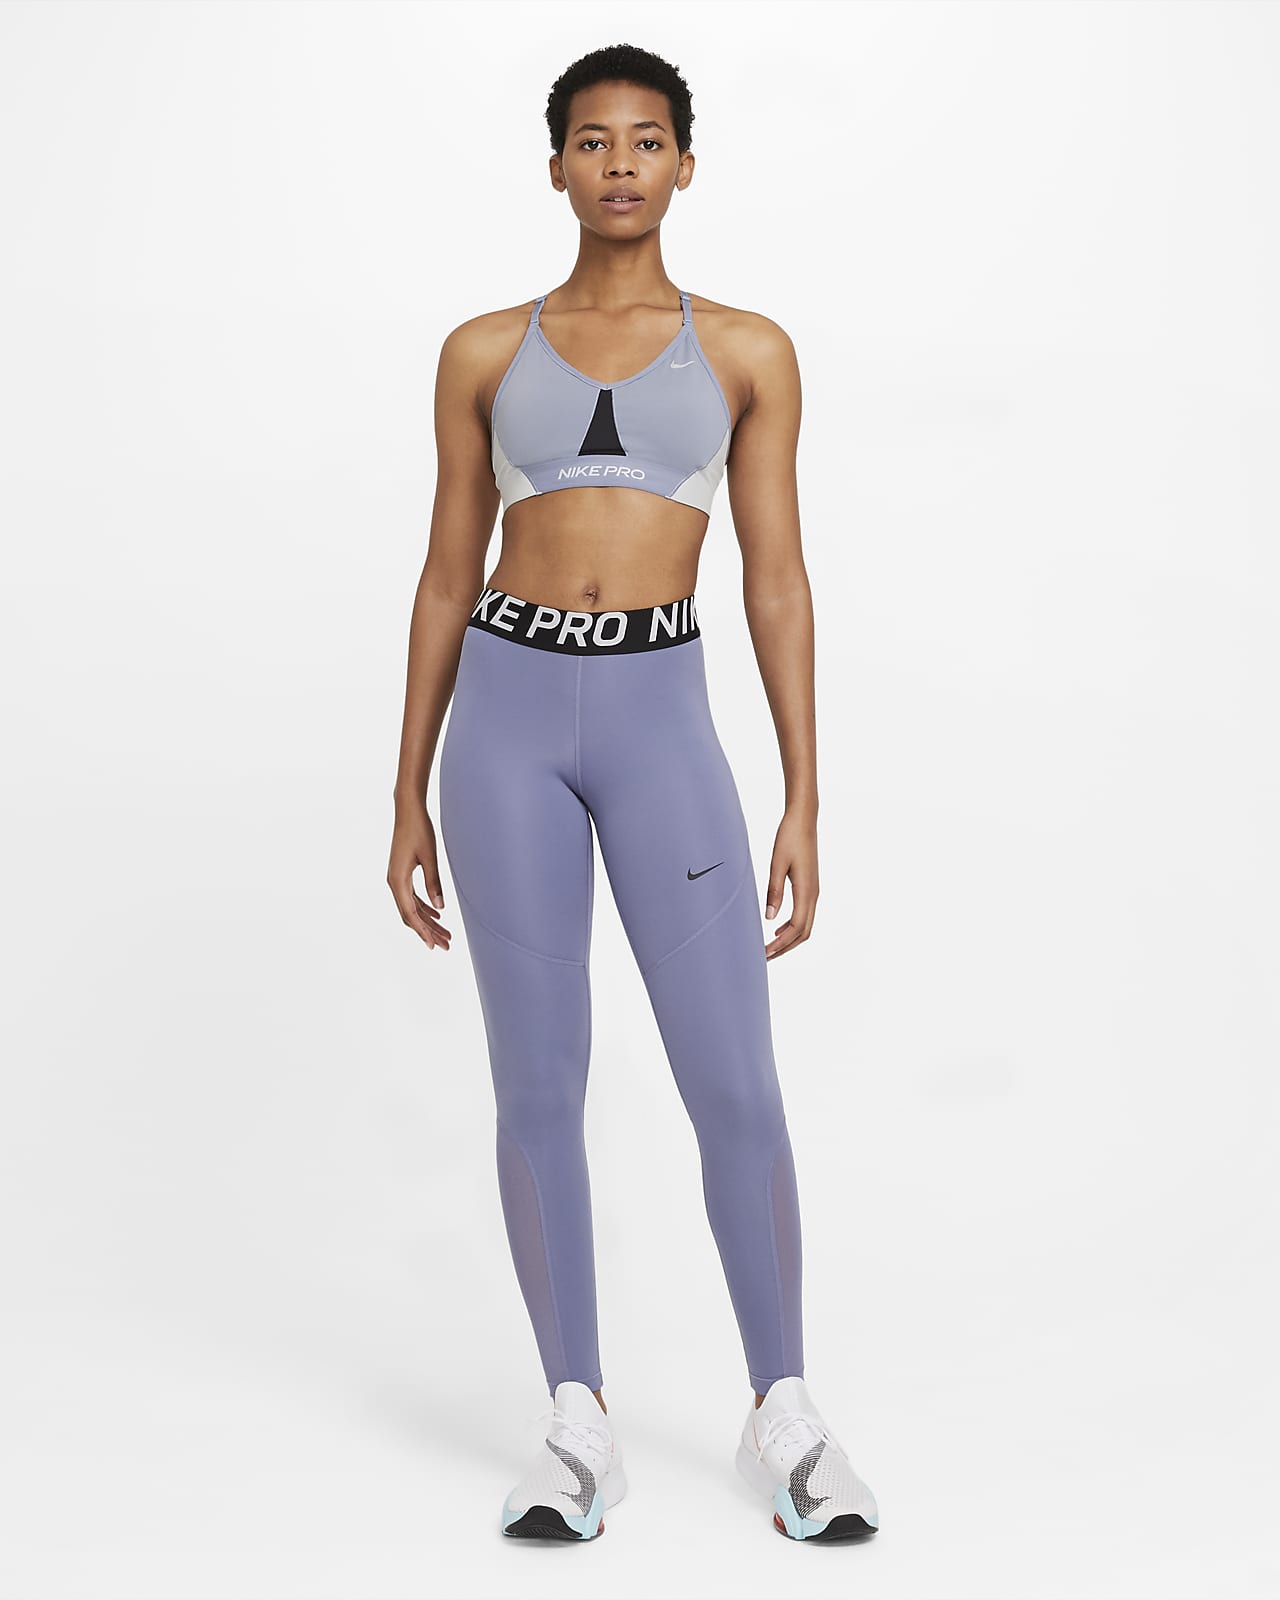 nike pro therma tights womens